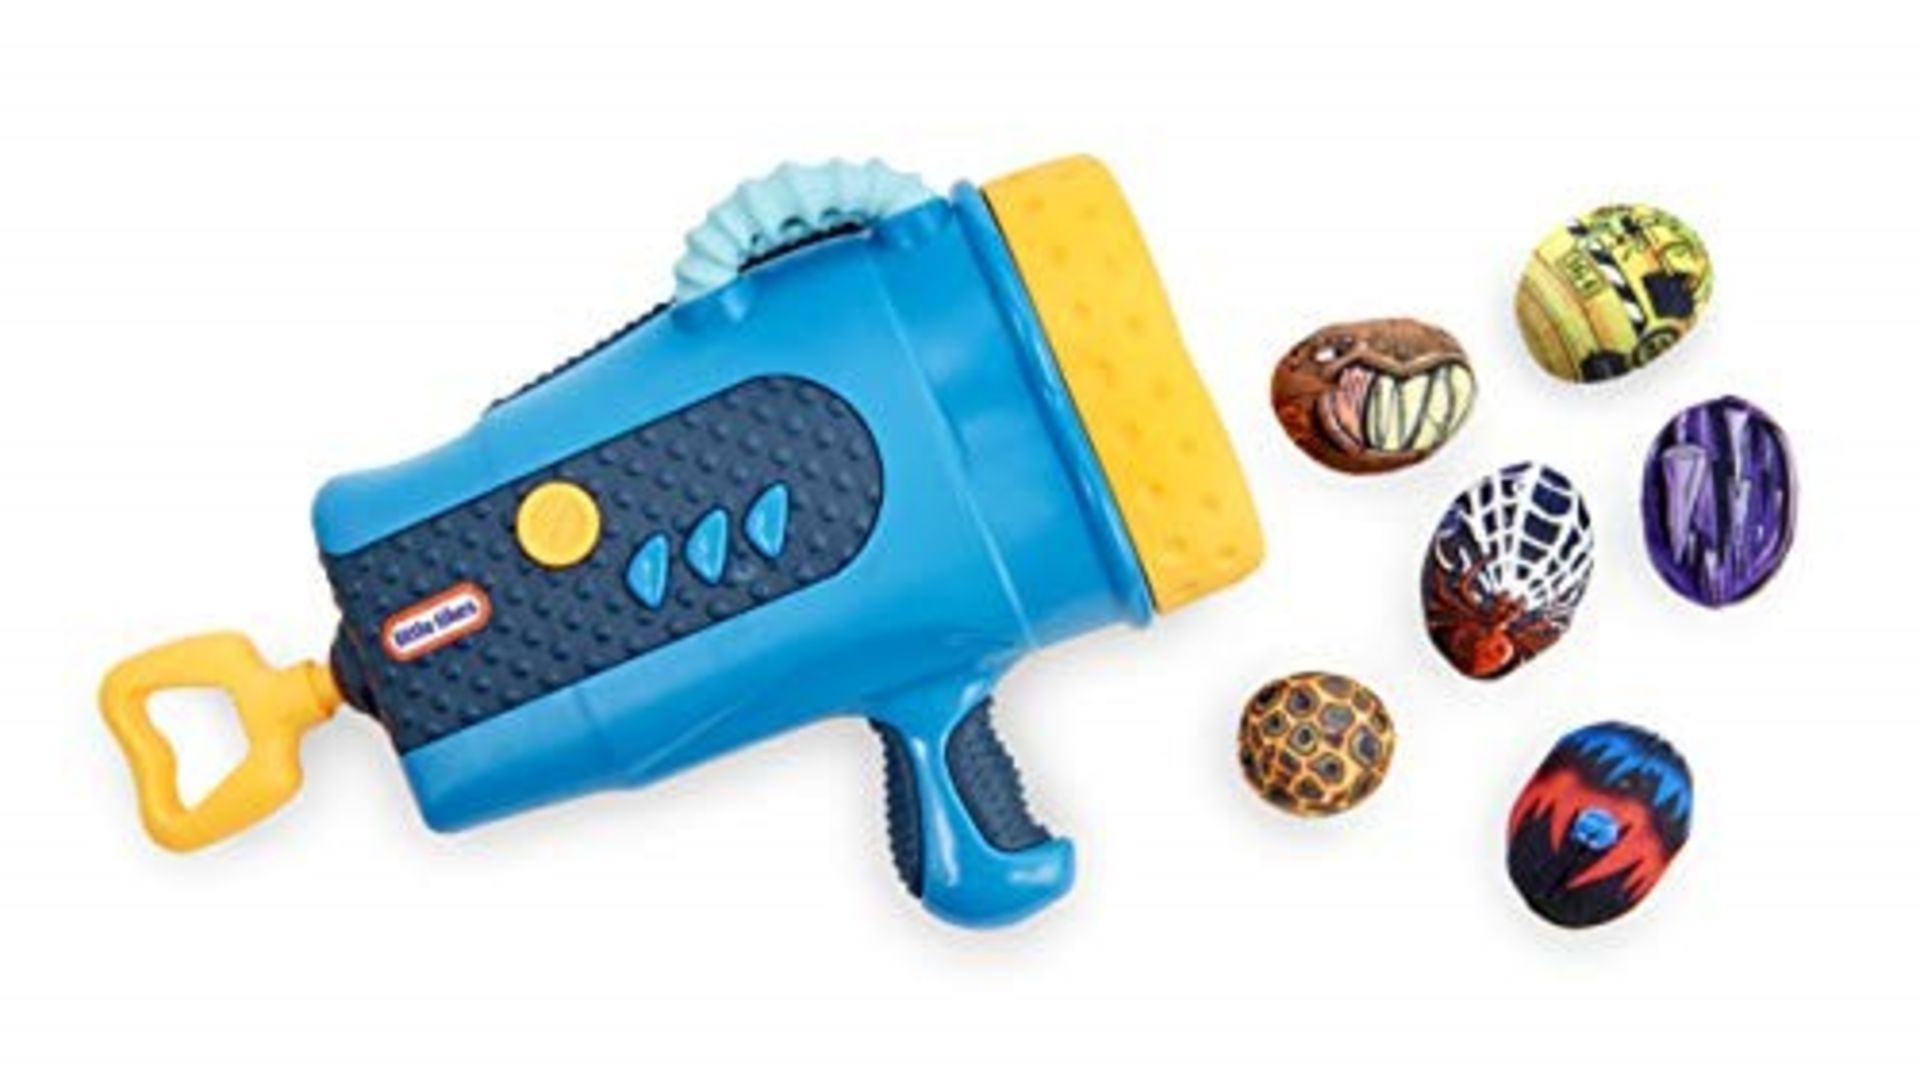 Little Tikes My First Mighty Blasters Dual Blaster - Super Safe Toy Hand Launcher for